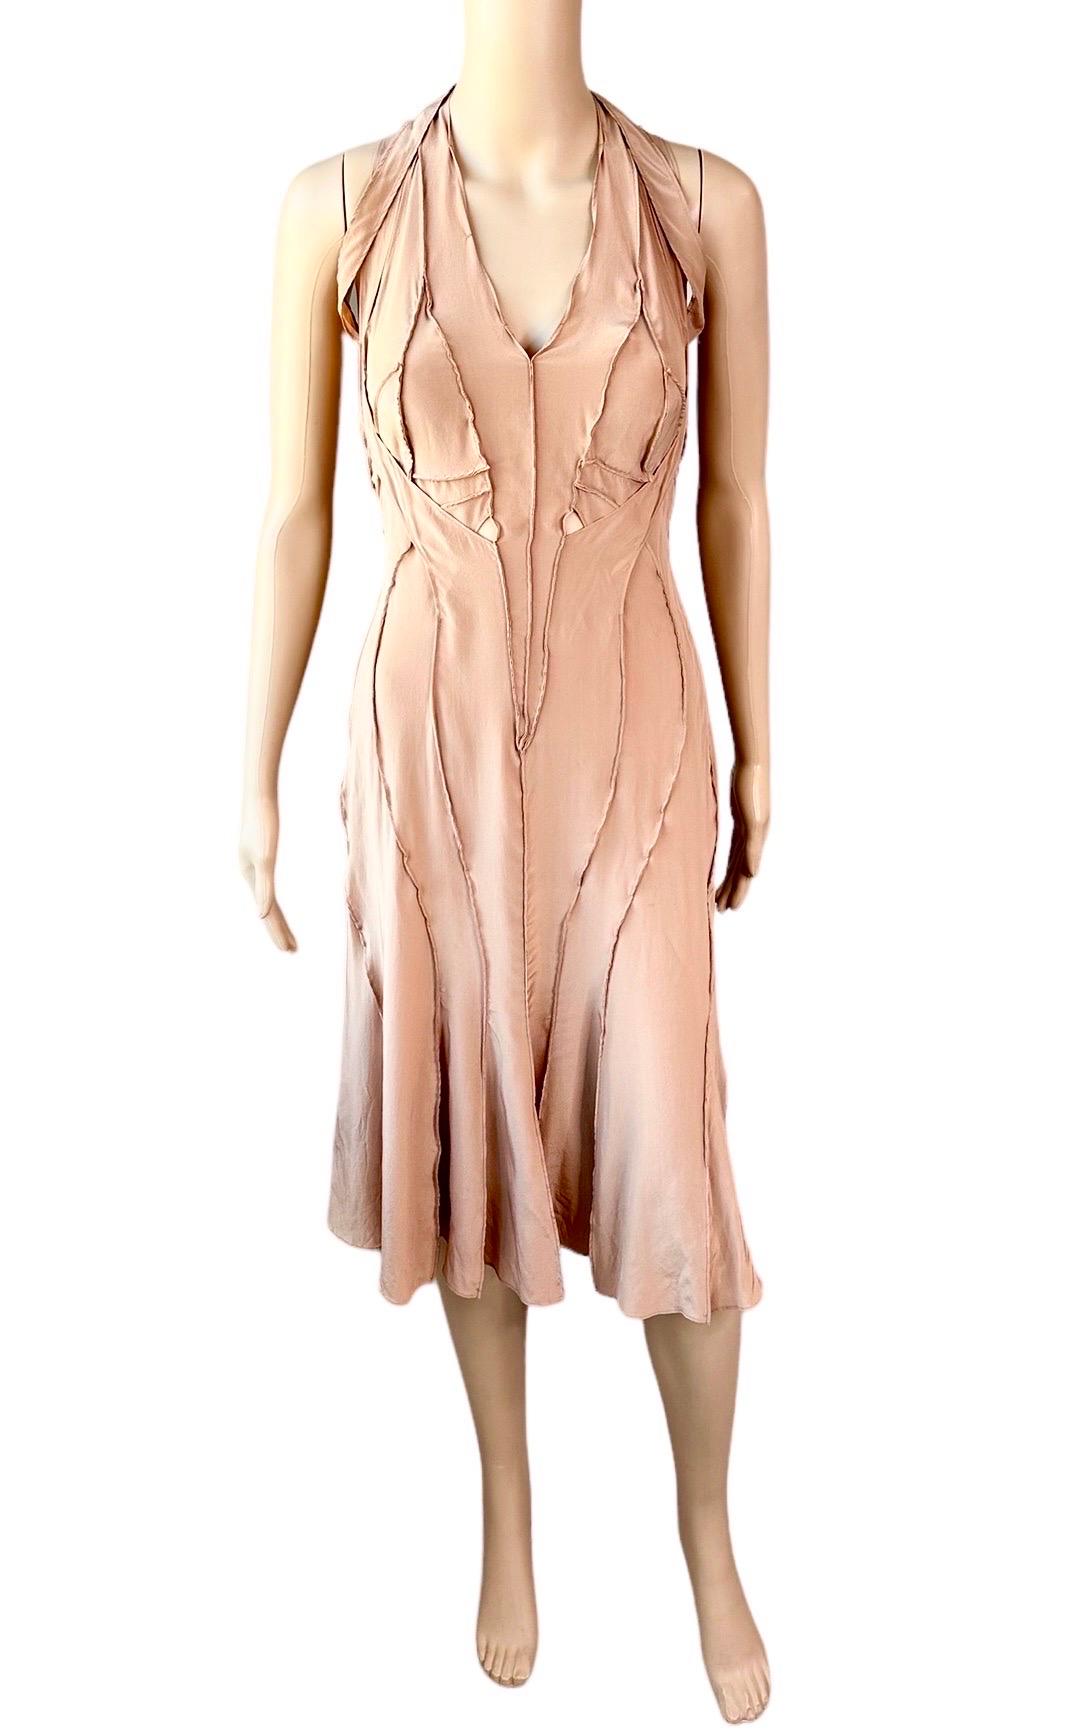 Tom Ford for Yves Saint Laurent YSL S/S 2003 Runway Cutout Silk Dress  In Good Condition For Sale In Naples, FL